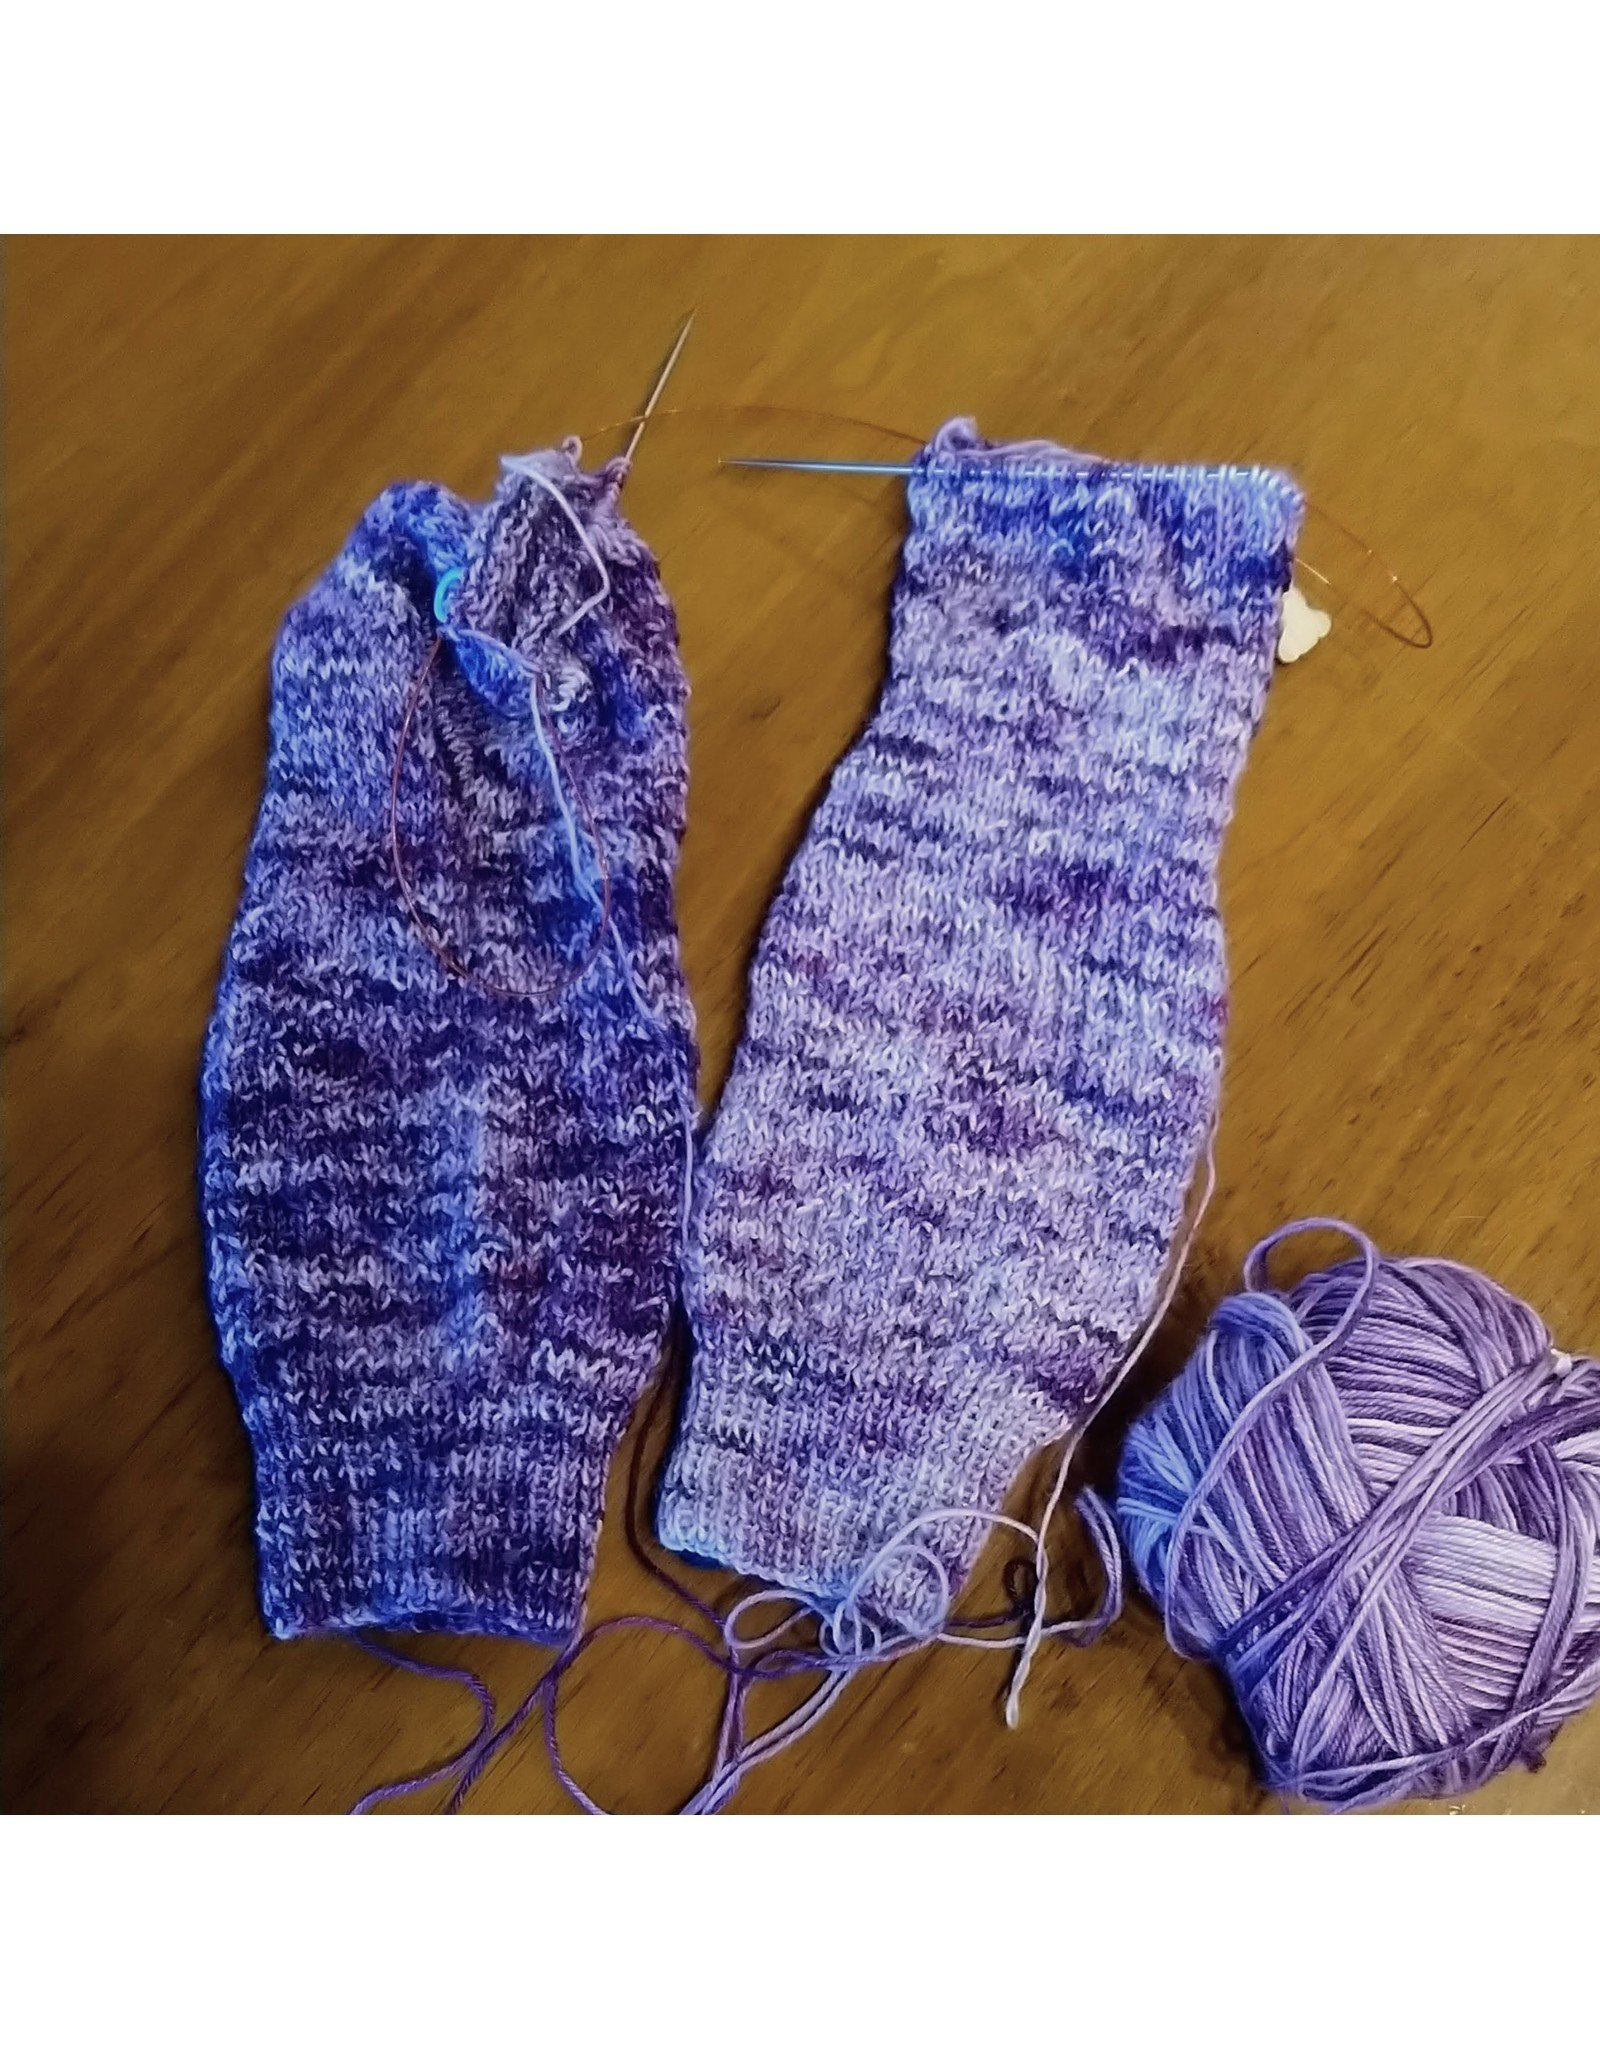 Knitting Class: Socks Two-at-a-Time Technique